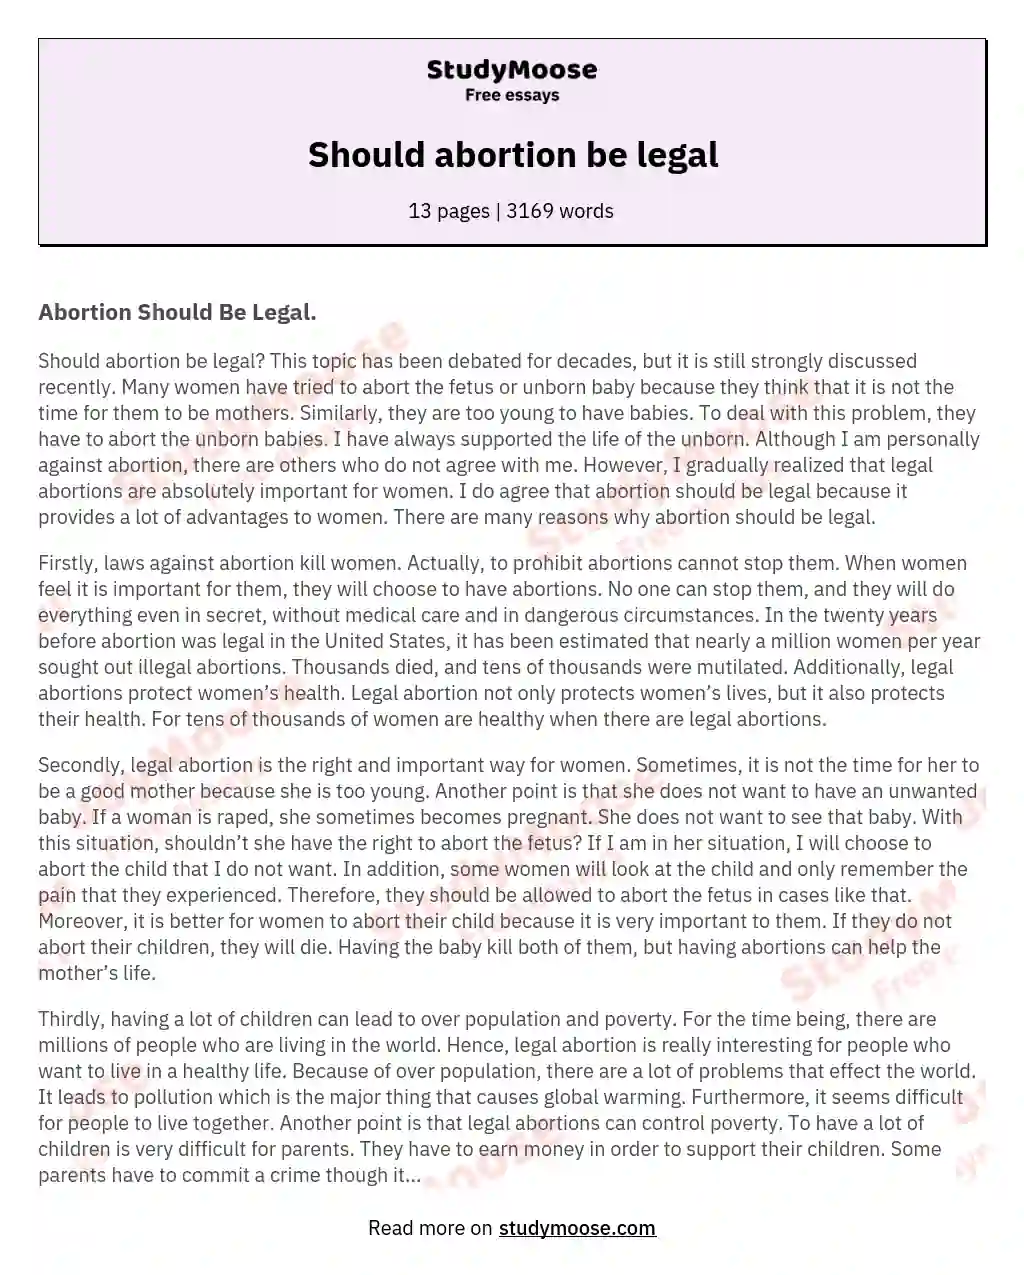 Should abortion be legal